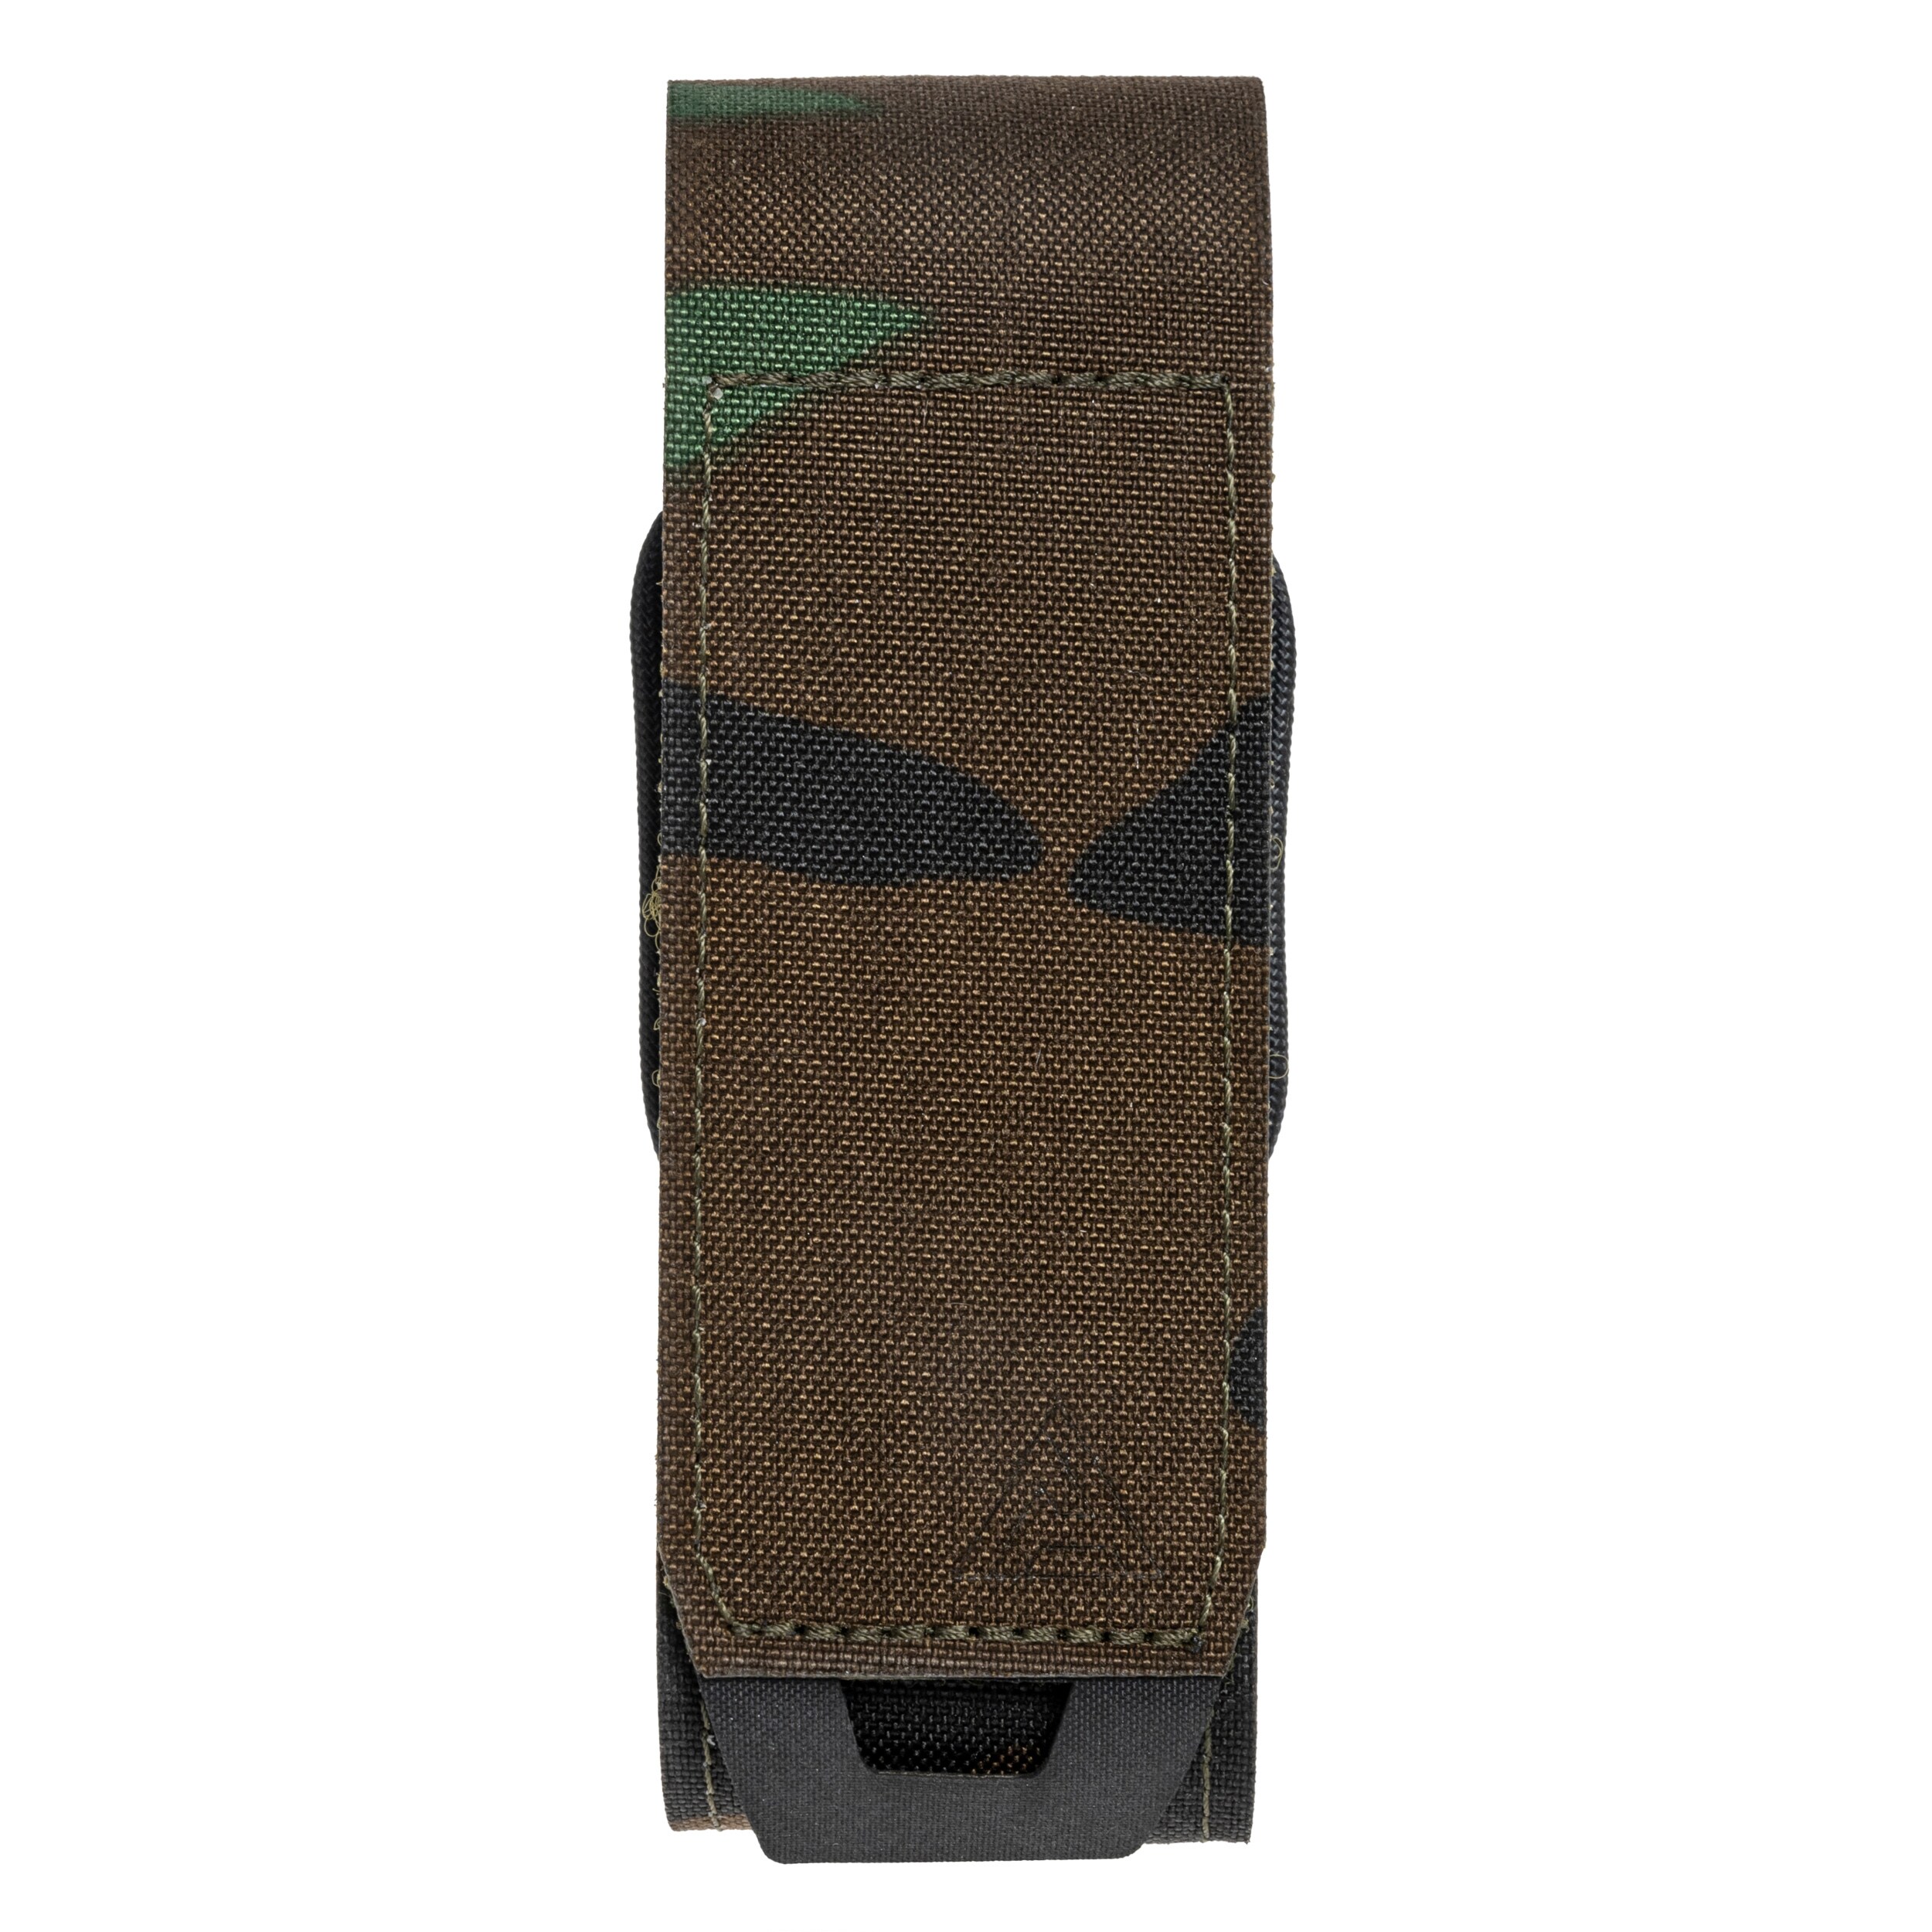 Ładownica Direct Action Flashbang Pouch - Woodland